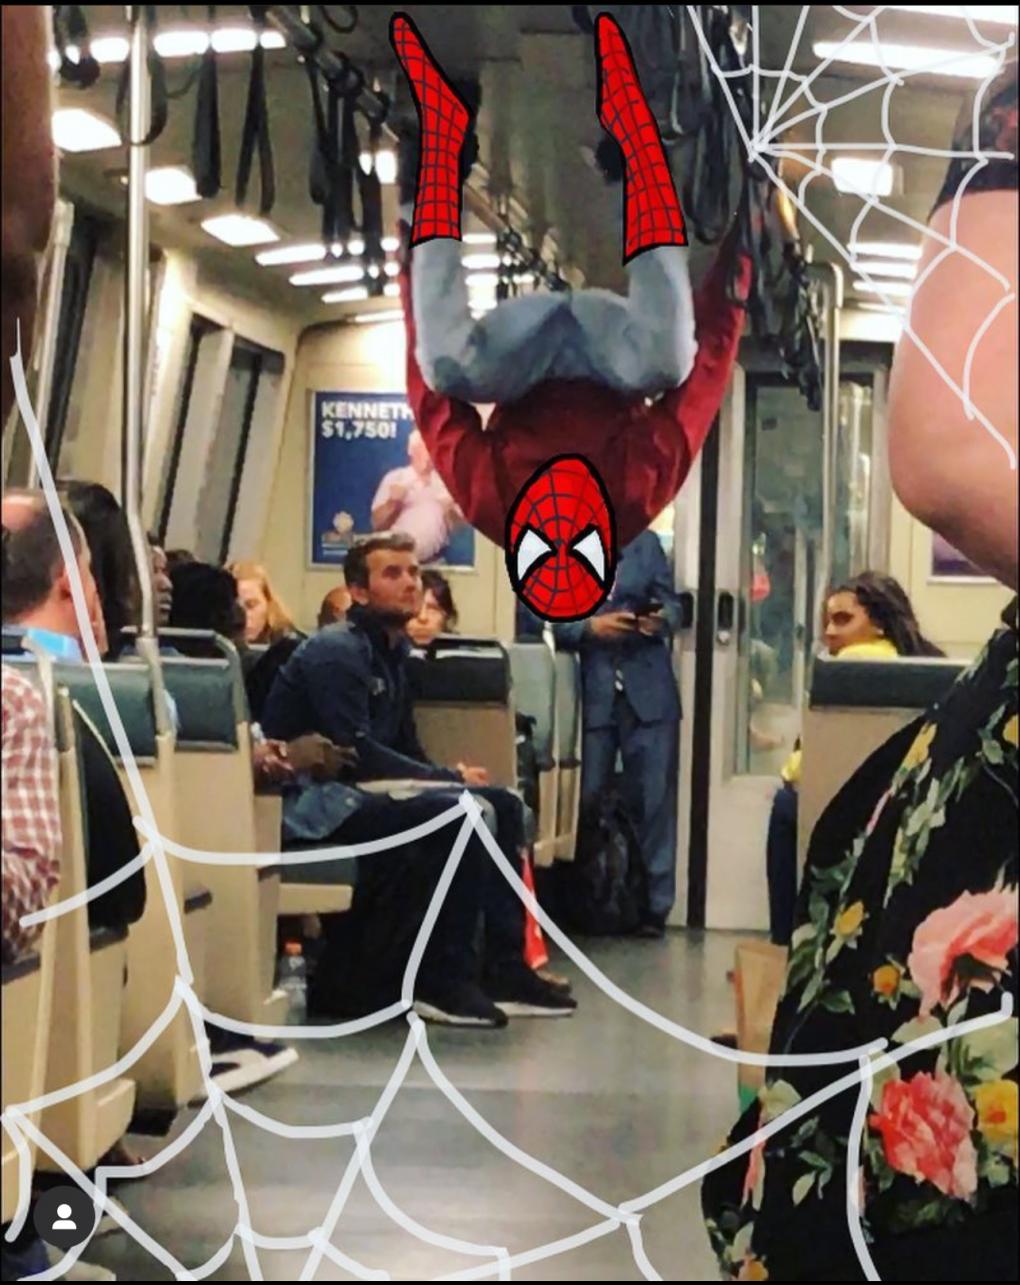 An individual dressed in a Spider-Man costume is performing a handstand on a moving train, with their feet raised towards the ceiling. The train interior is populated with various passengers seated and standing.